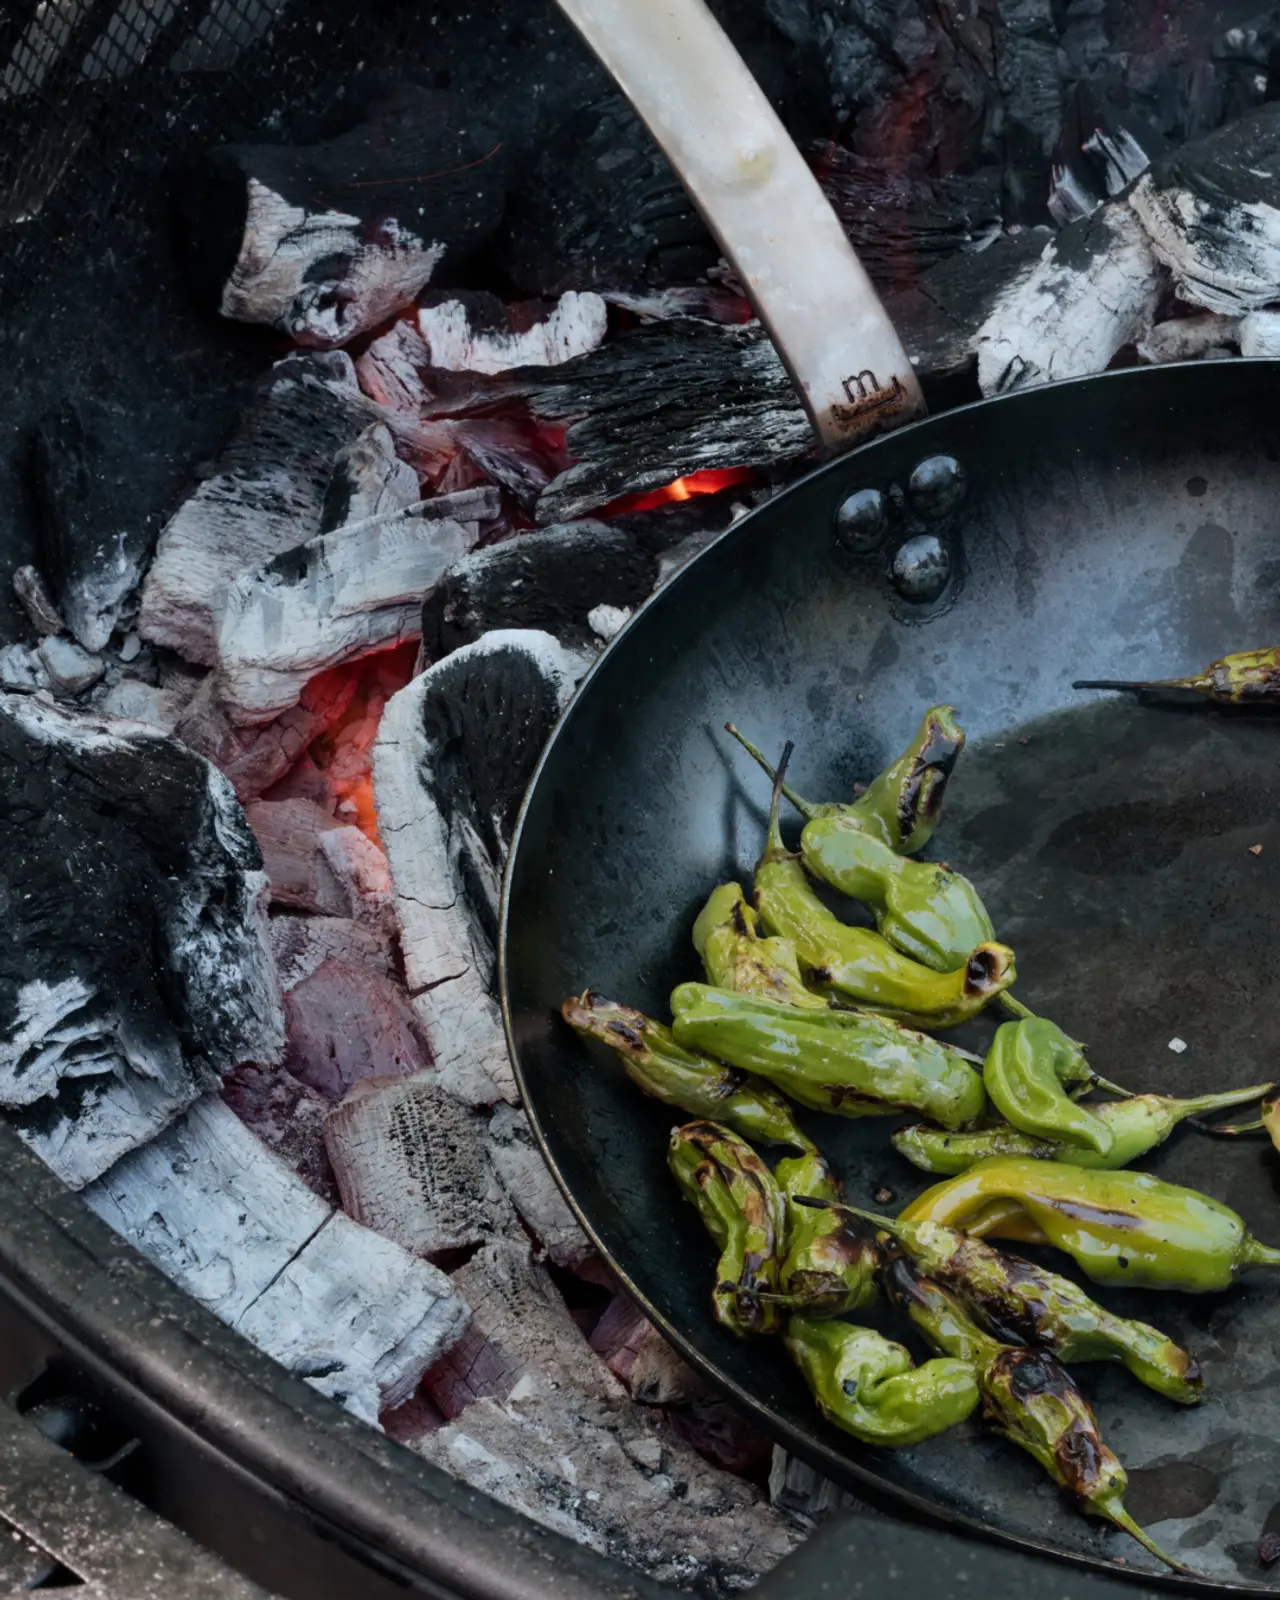 Green chili peppers are being roasted in a pan over smoldering coals.